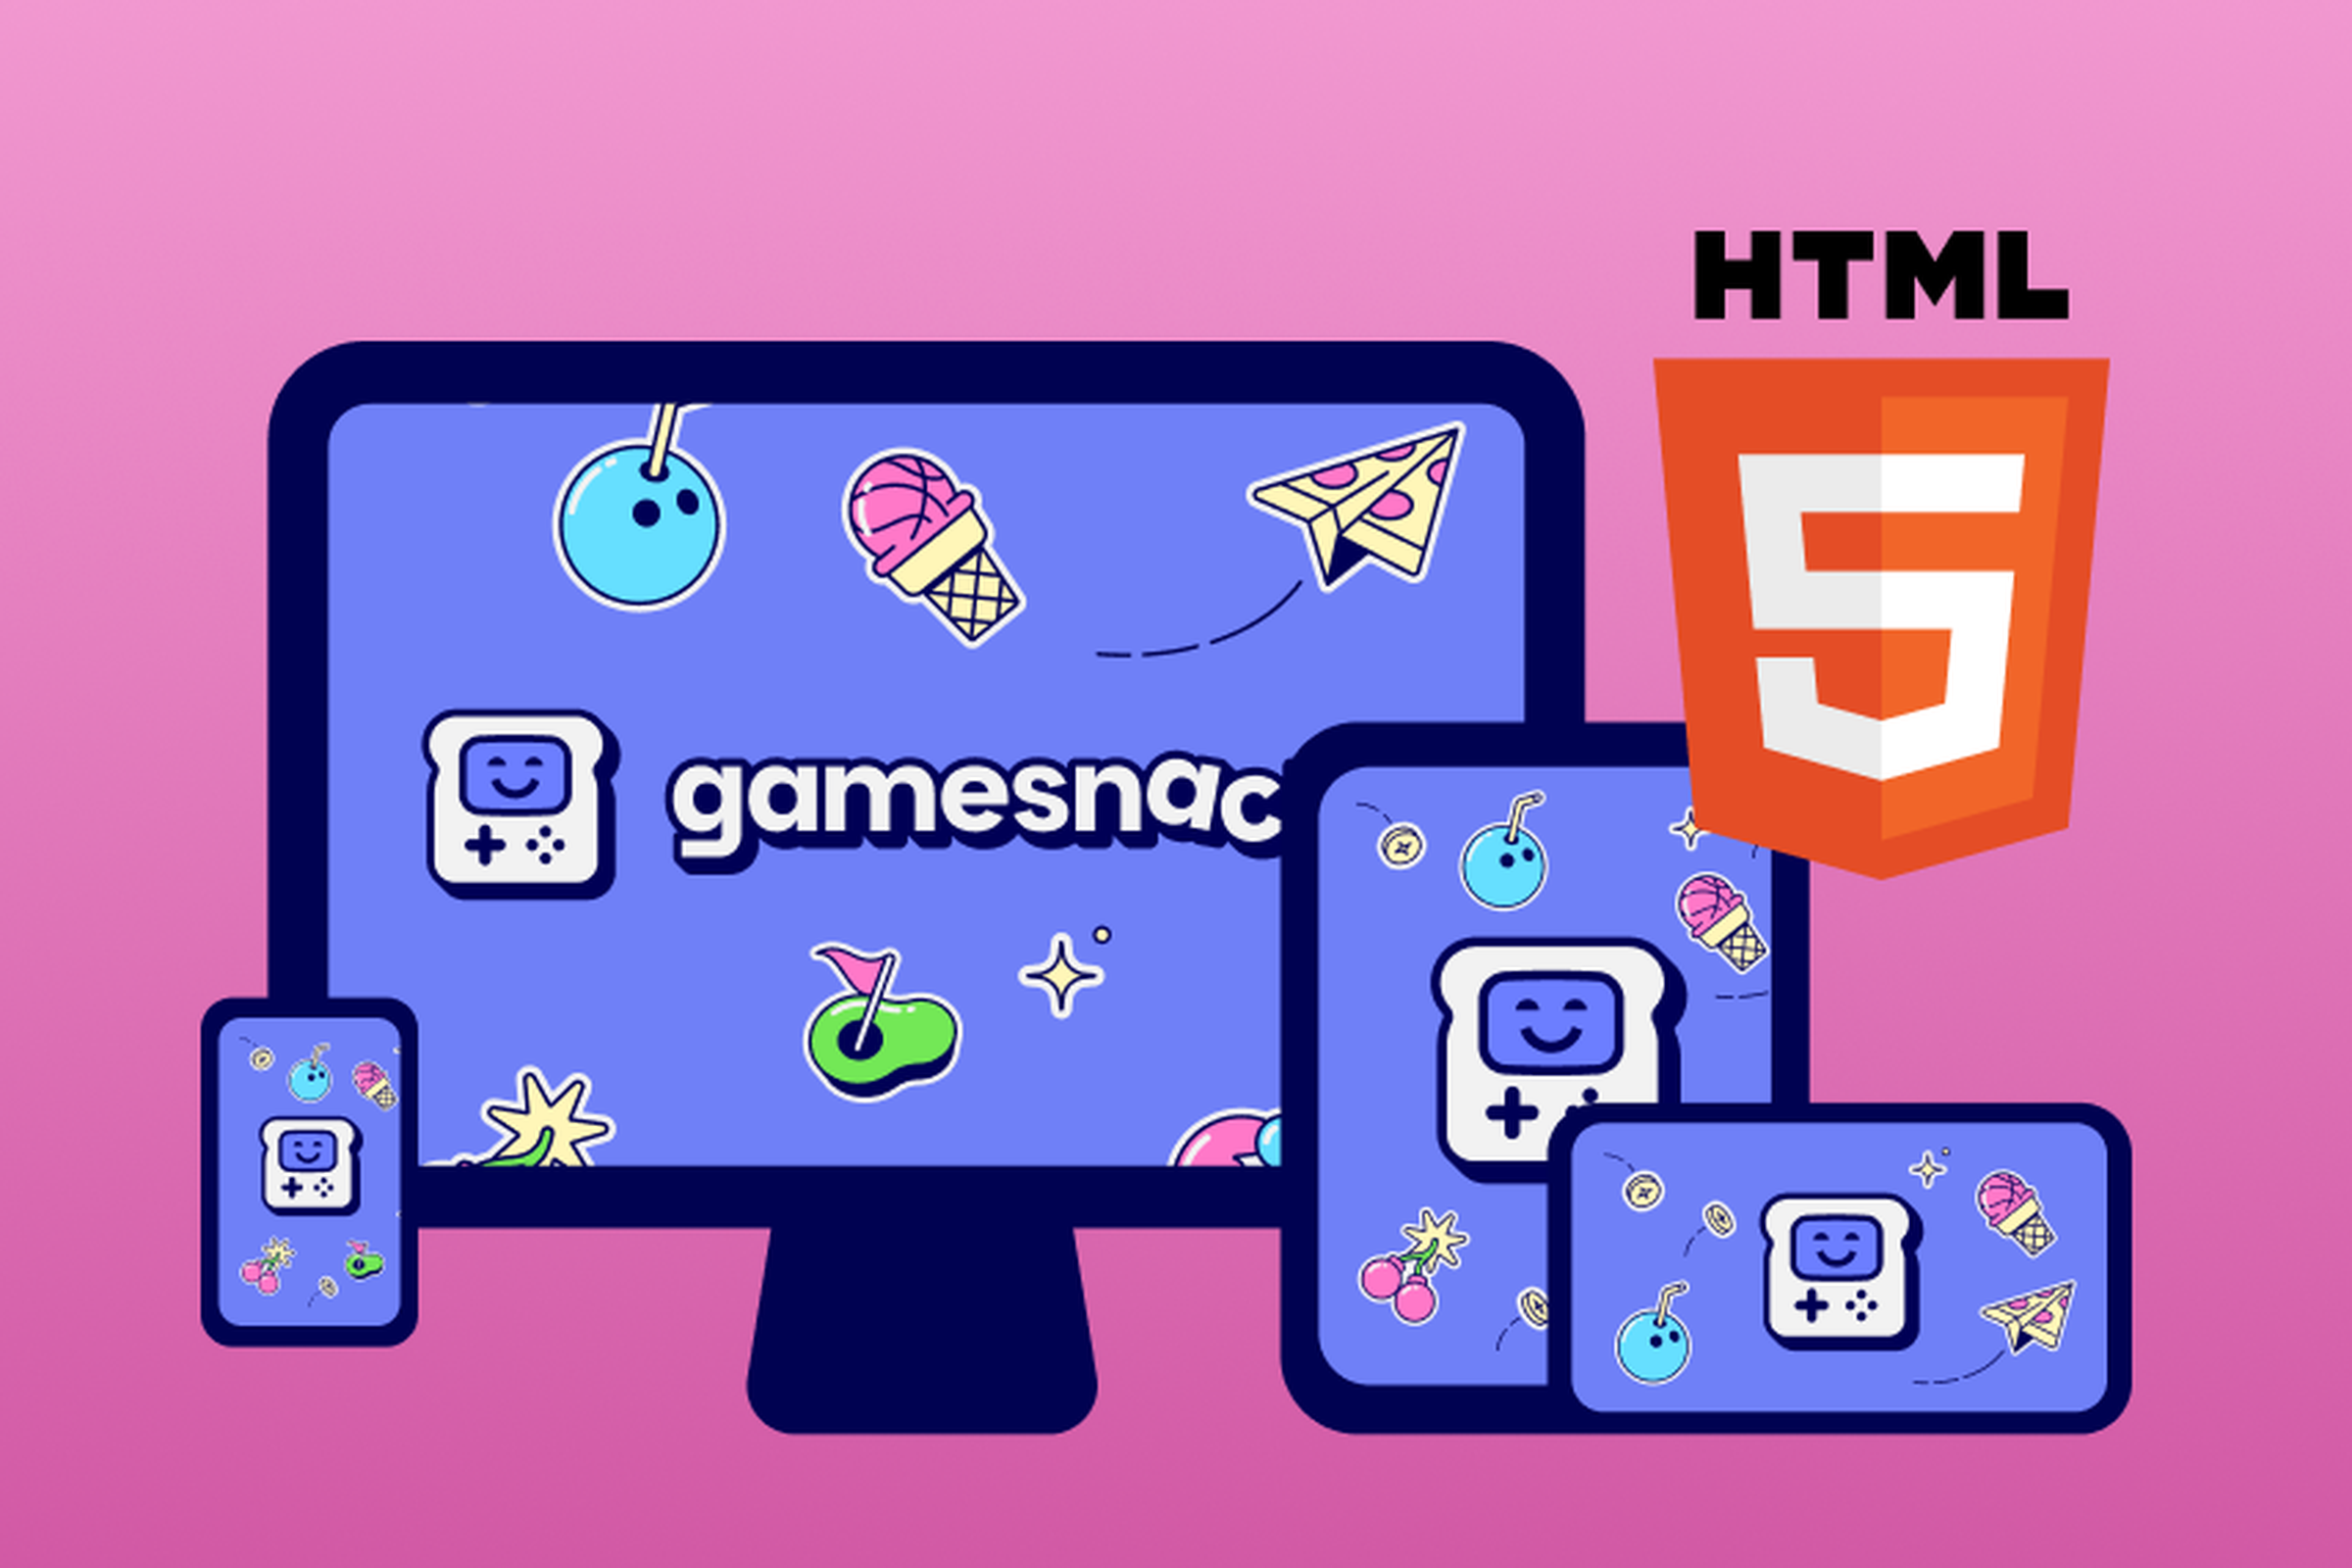 Html games. Html5 games. Play html games. Android auto игры Gamesnacks. Игры нтмл